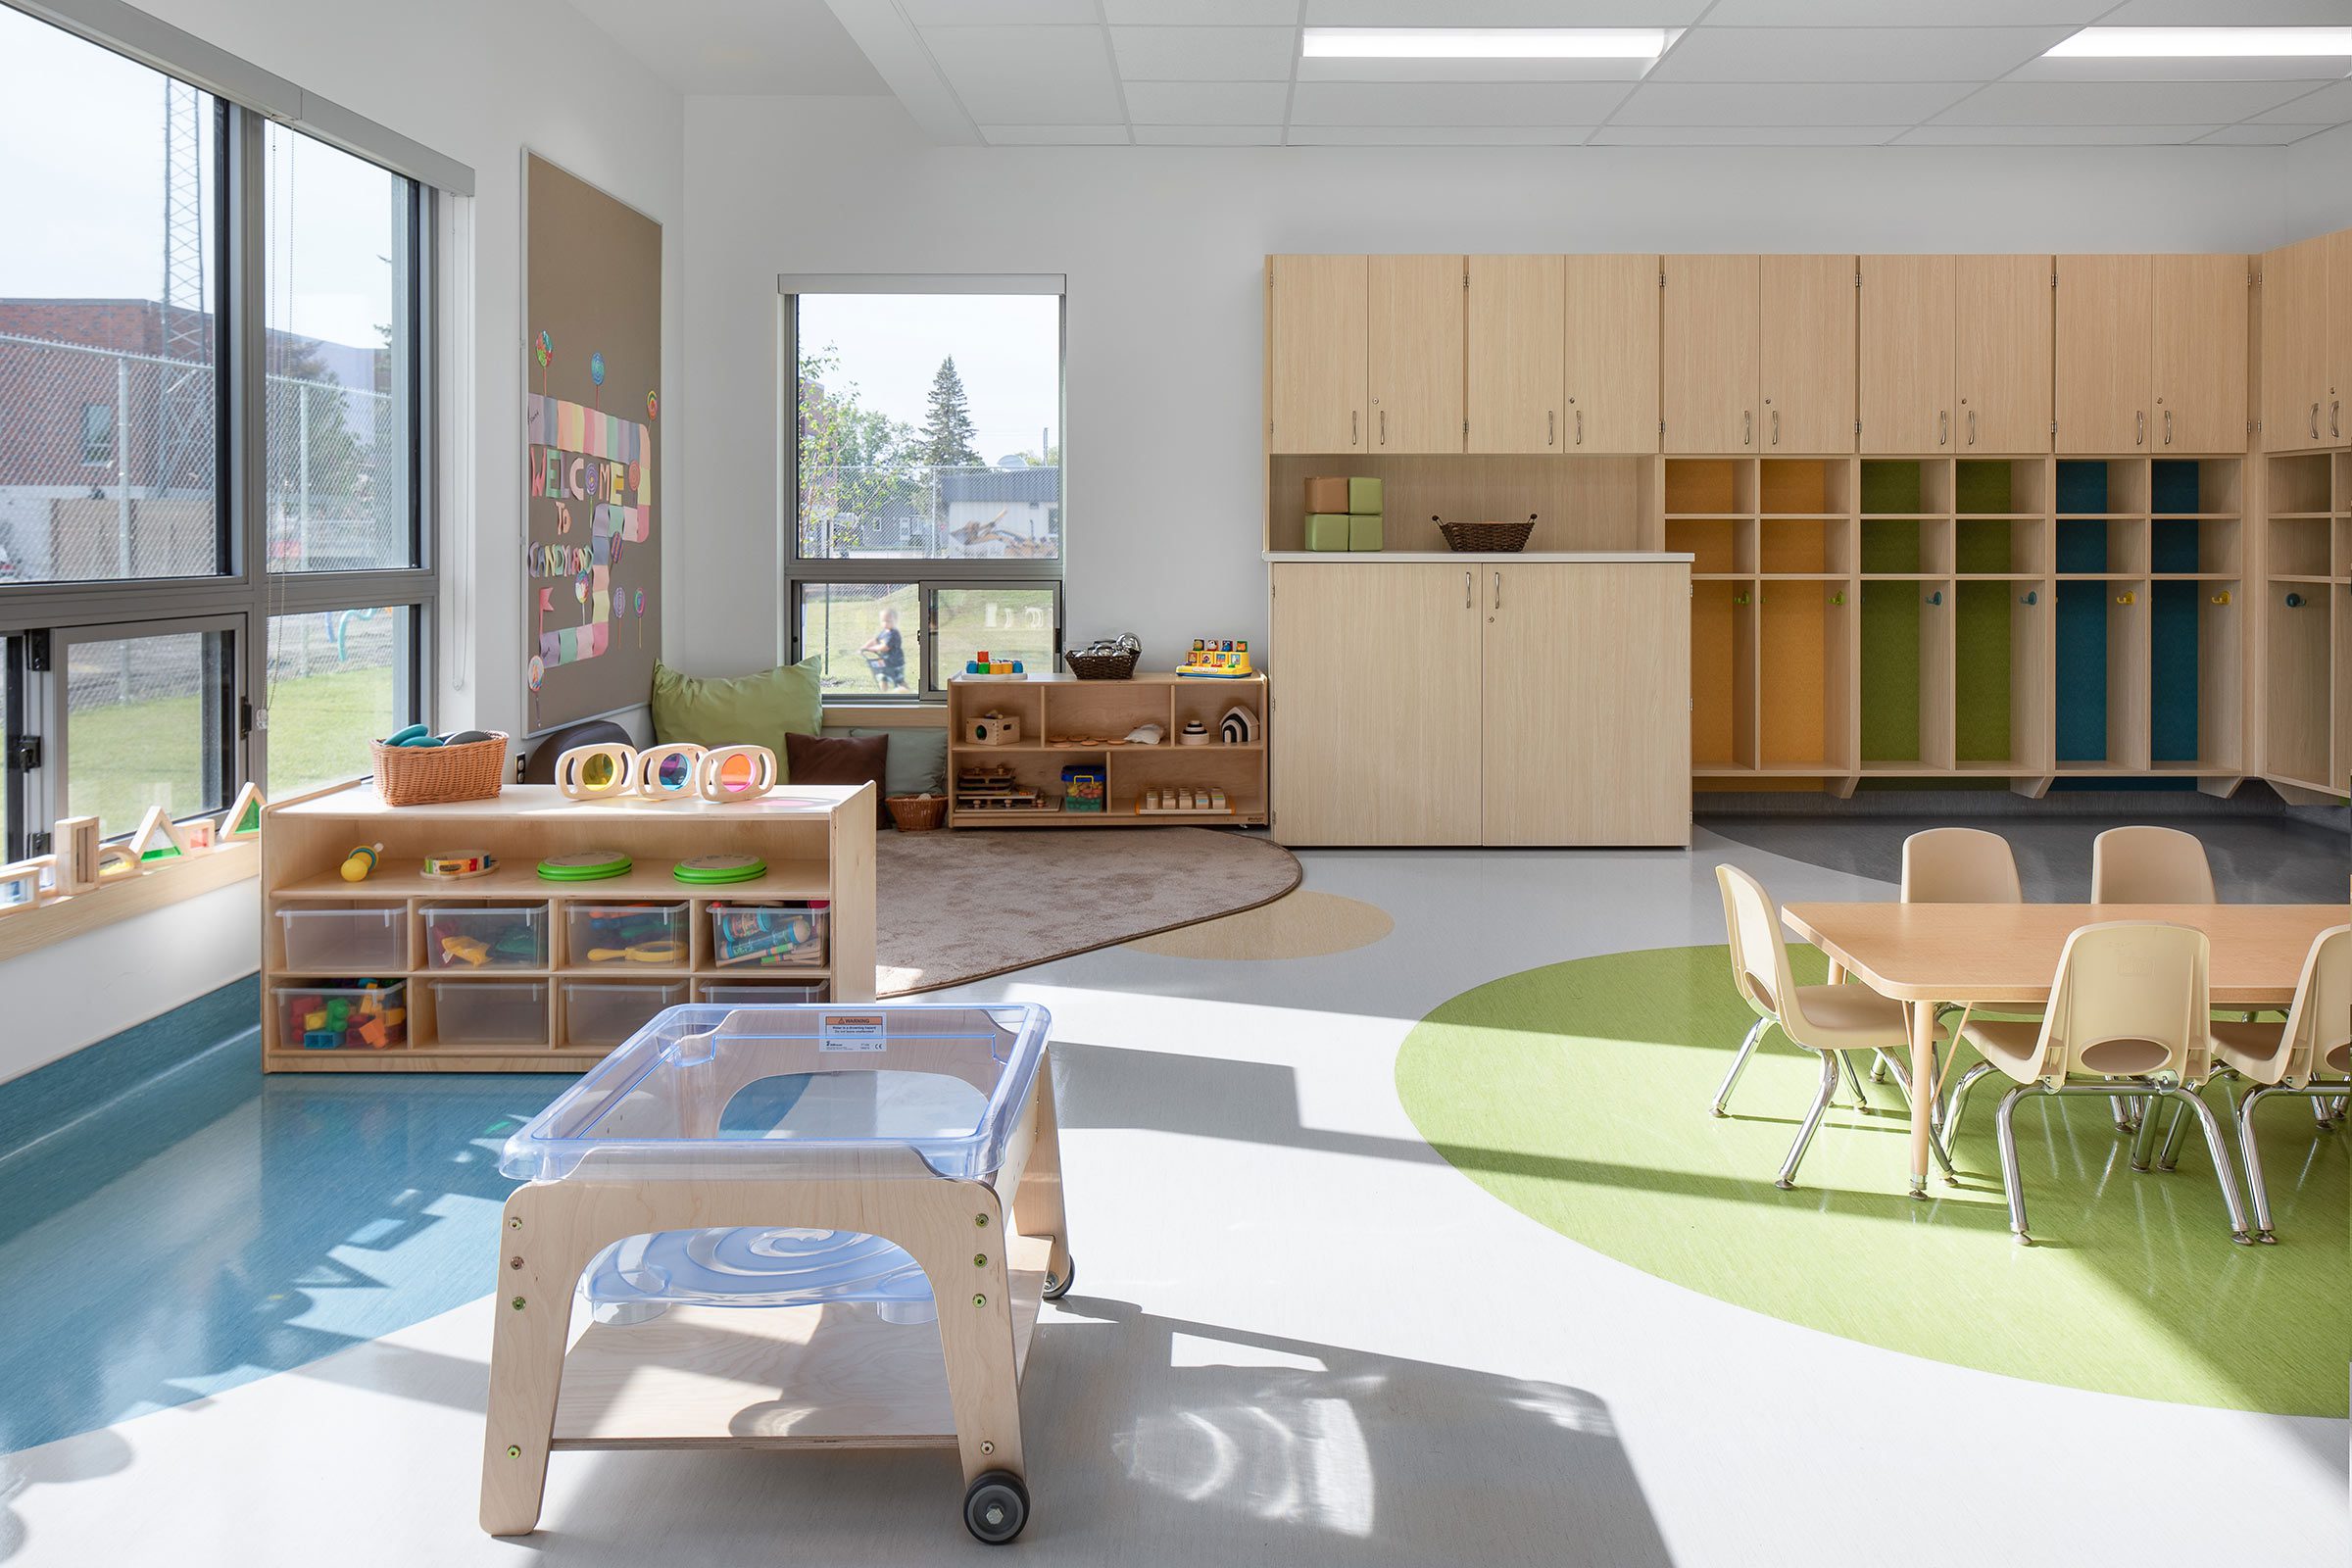 Daycare interior with sunlight filling the room.